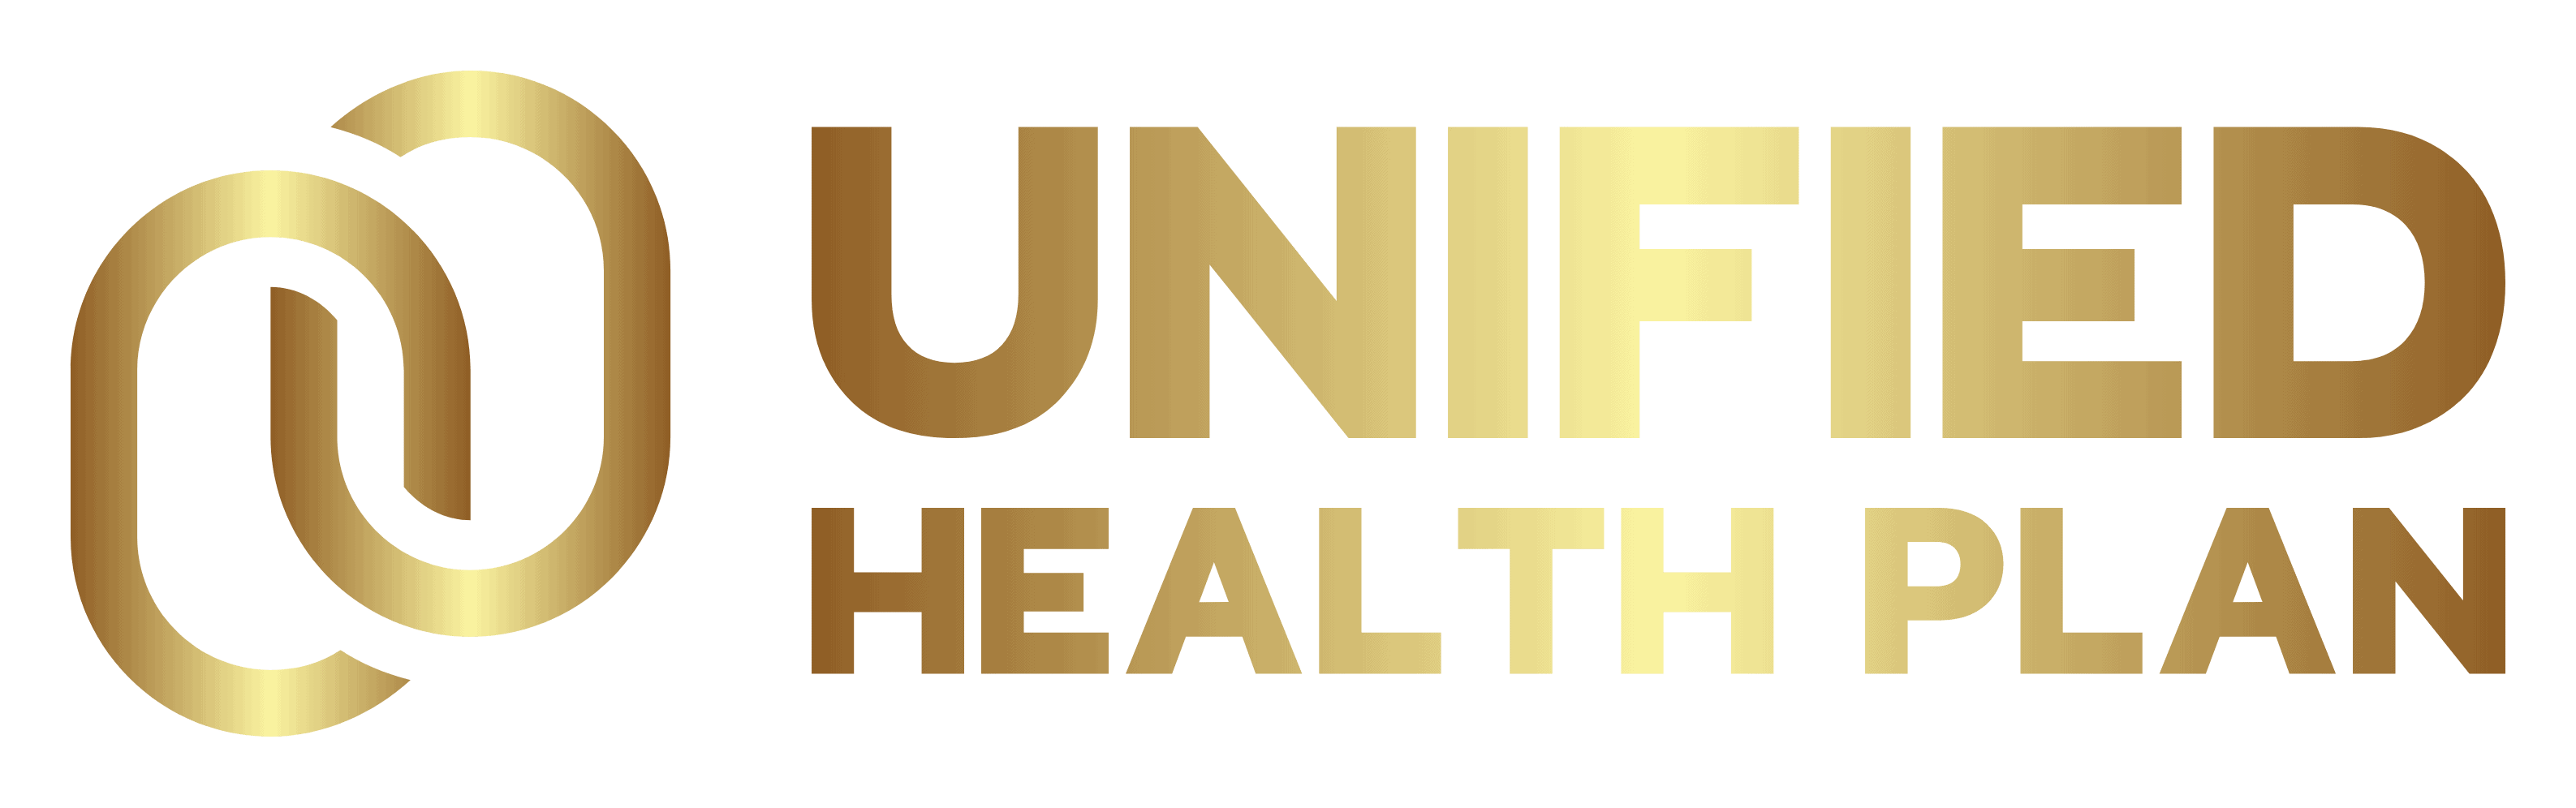 Unified Health Plan